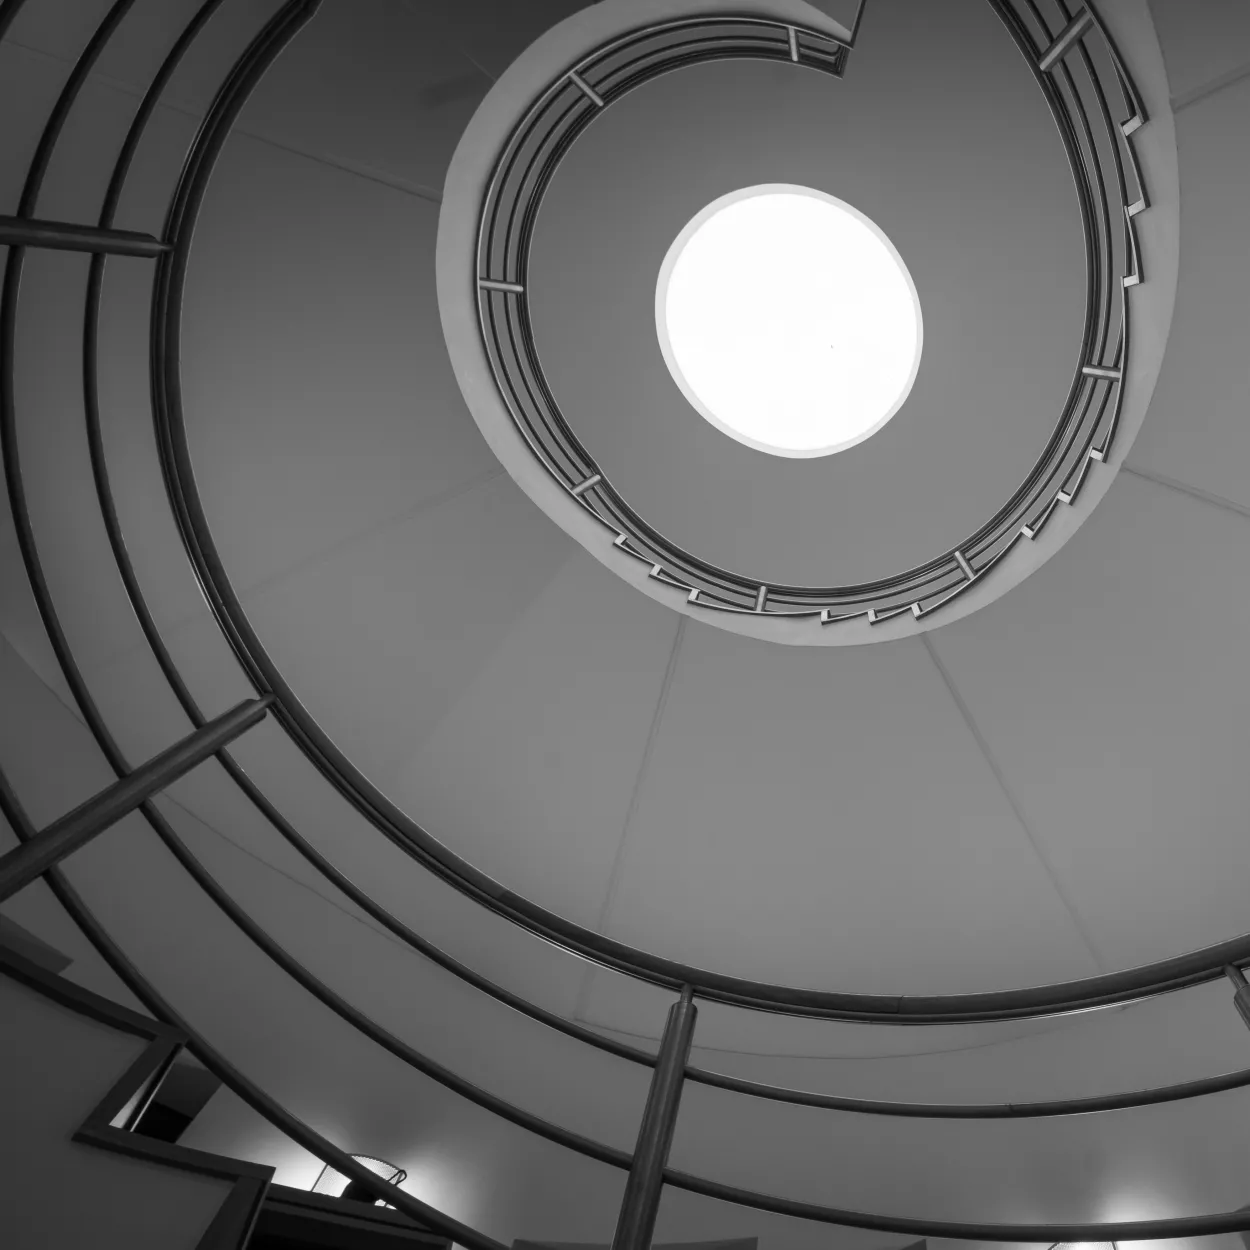 Spiral shape of the Library Tower